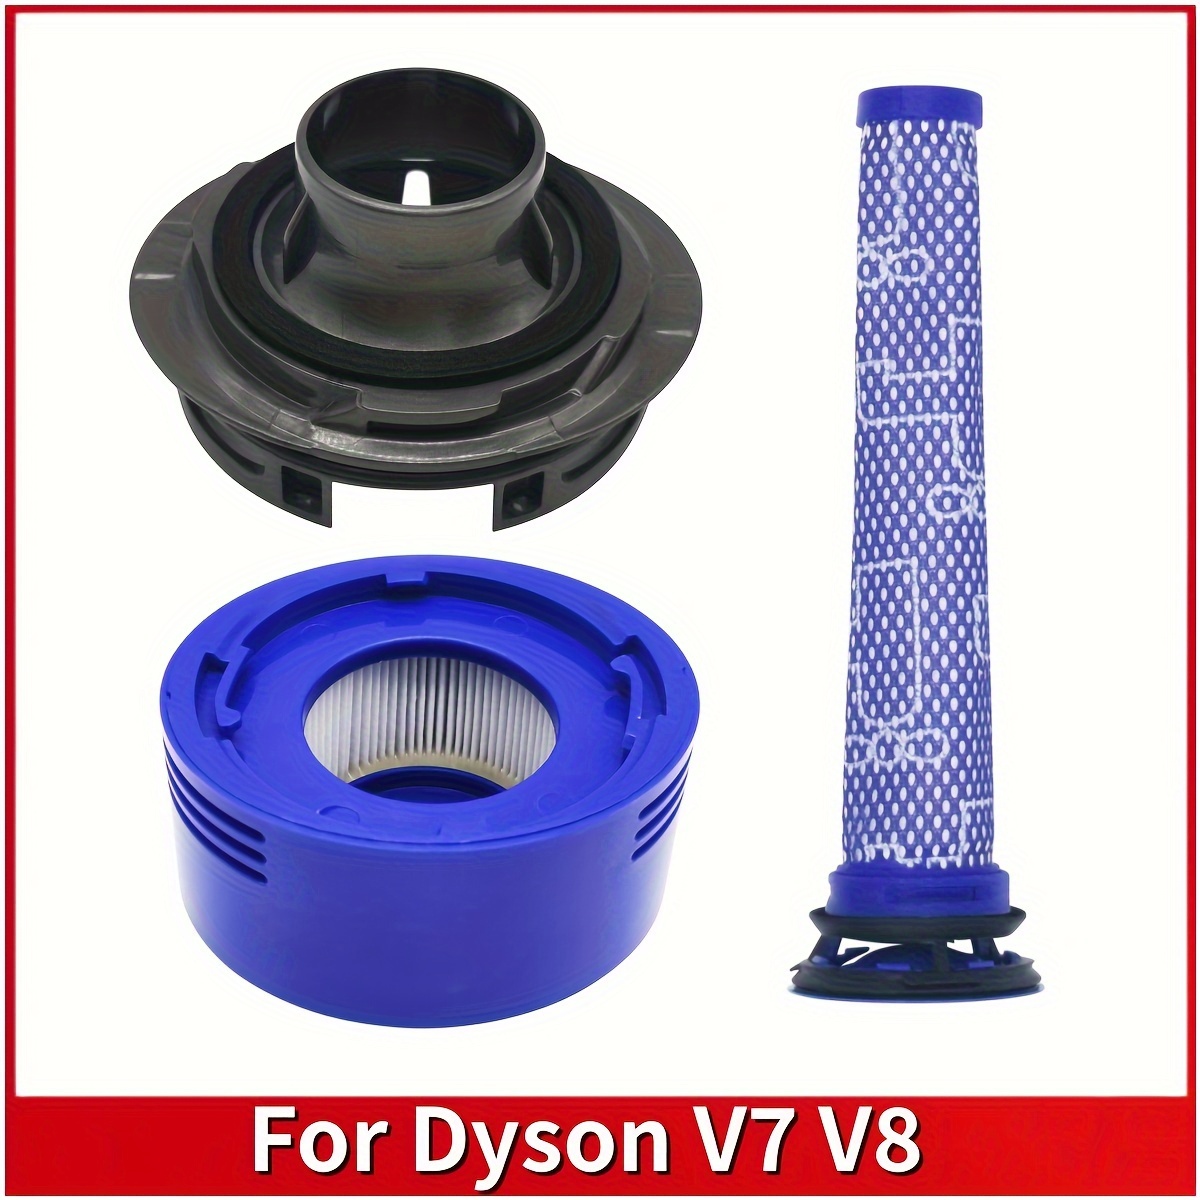  Filter Replacement & Motor Cover Compatible with Dyson